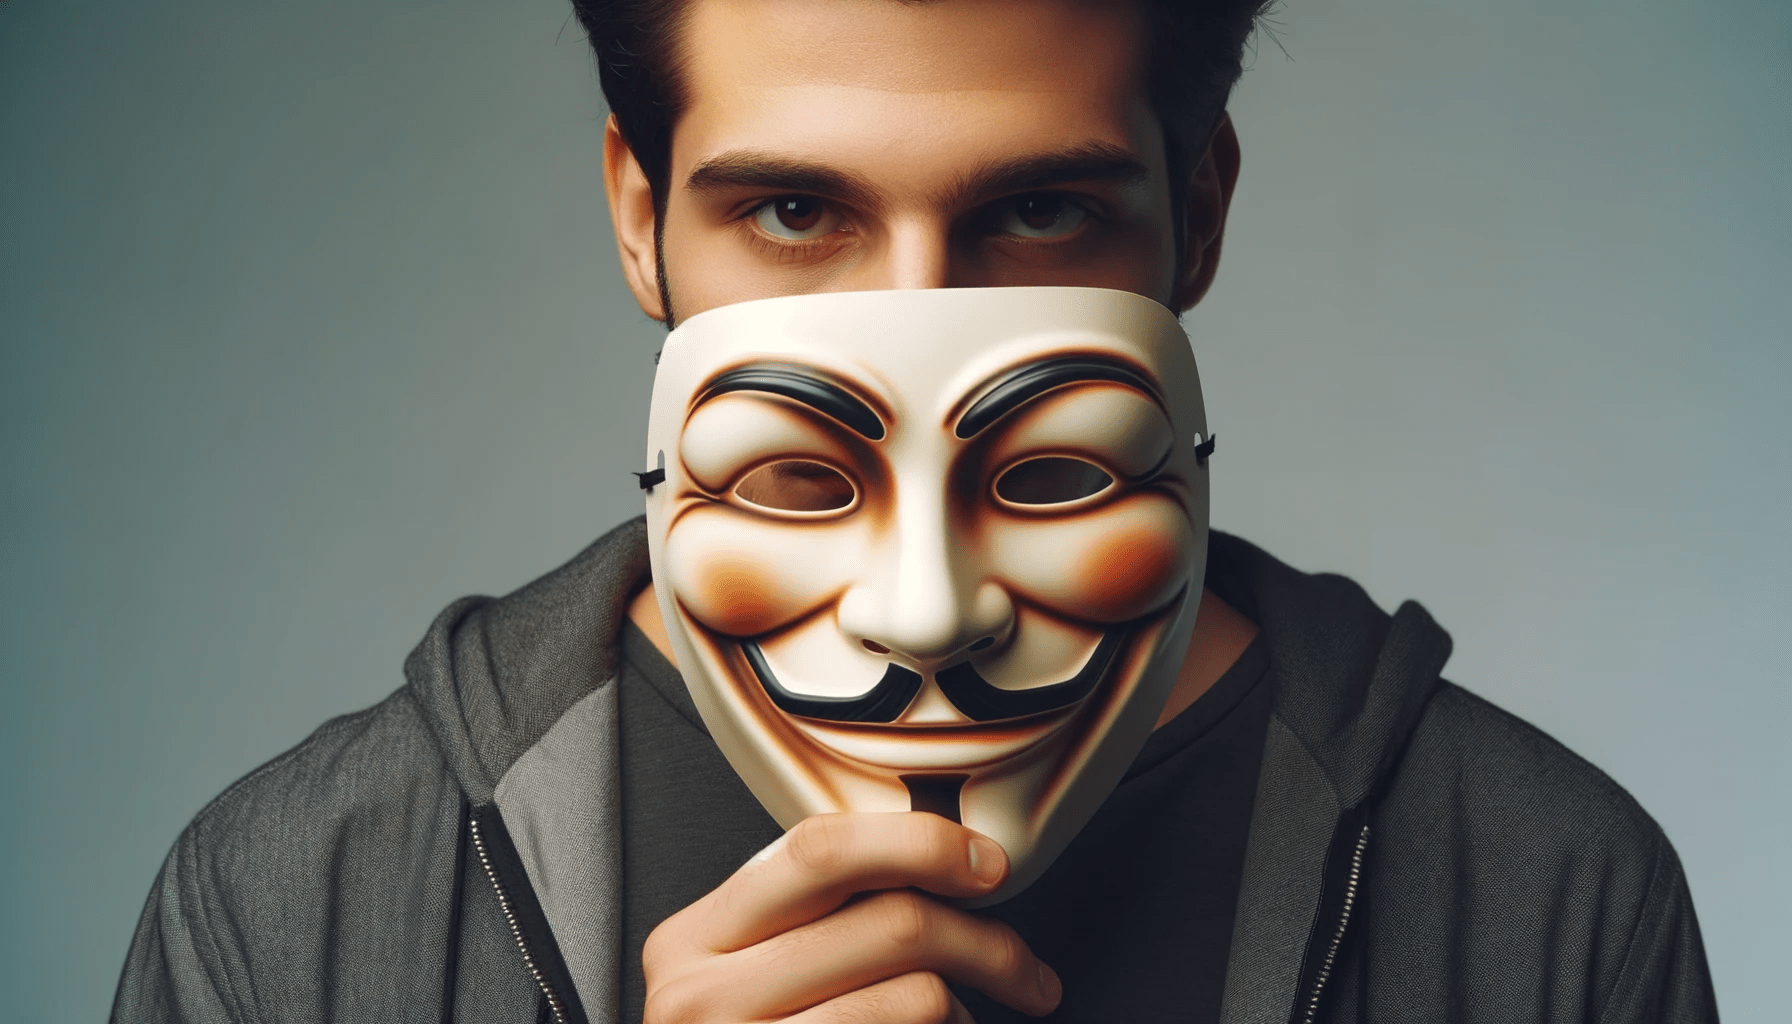 man holding a smiling mask in front of their face but their true expression behind the mask is sly and deceitful symbo 1